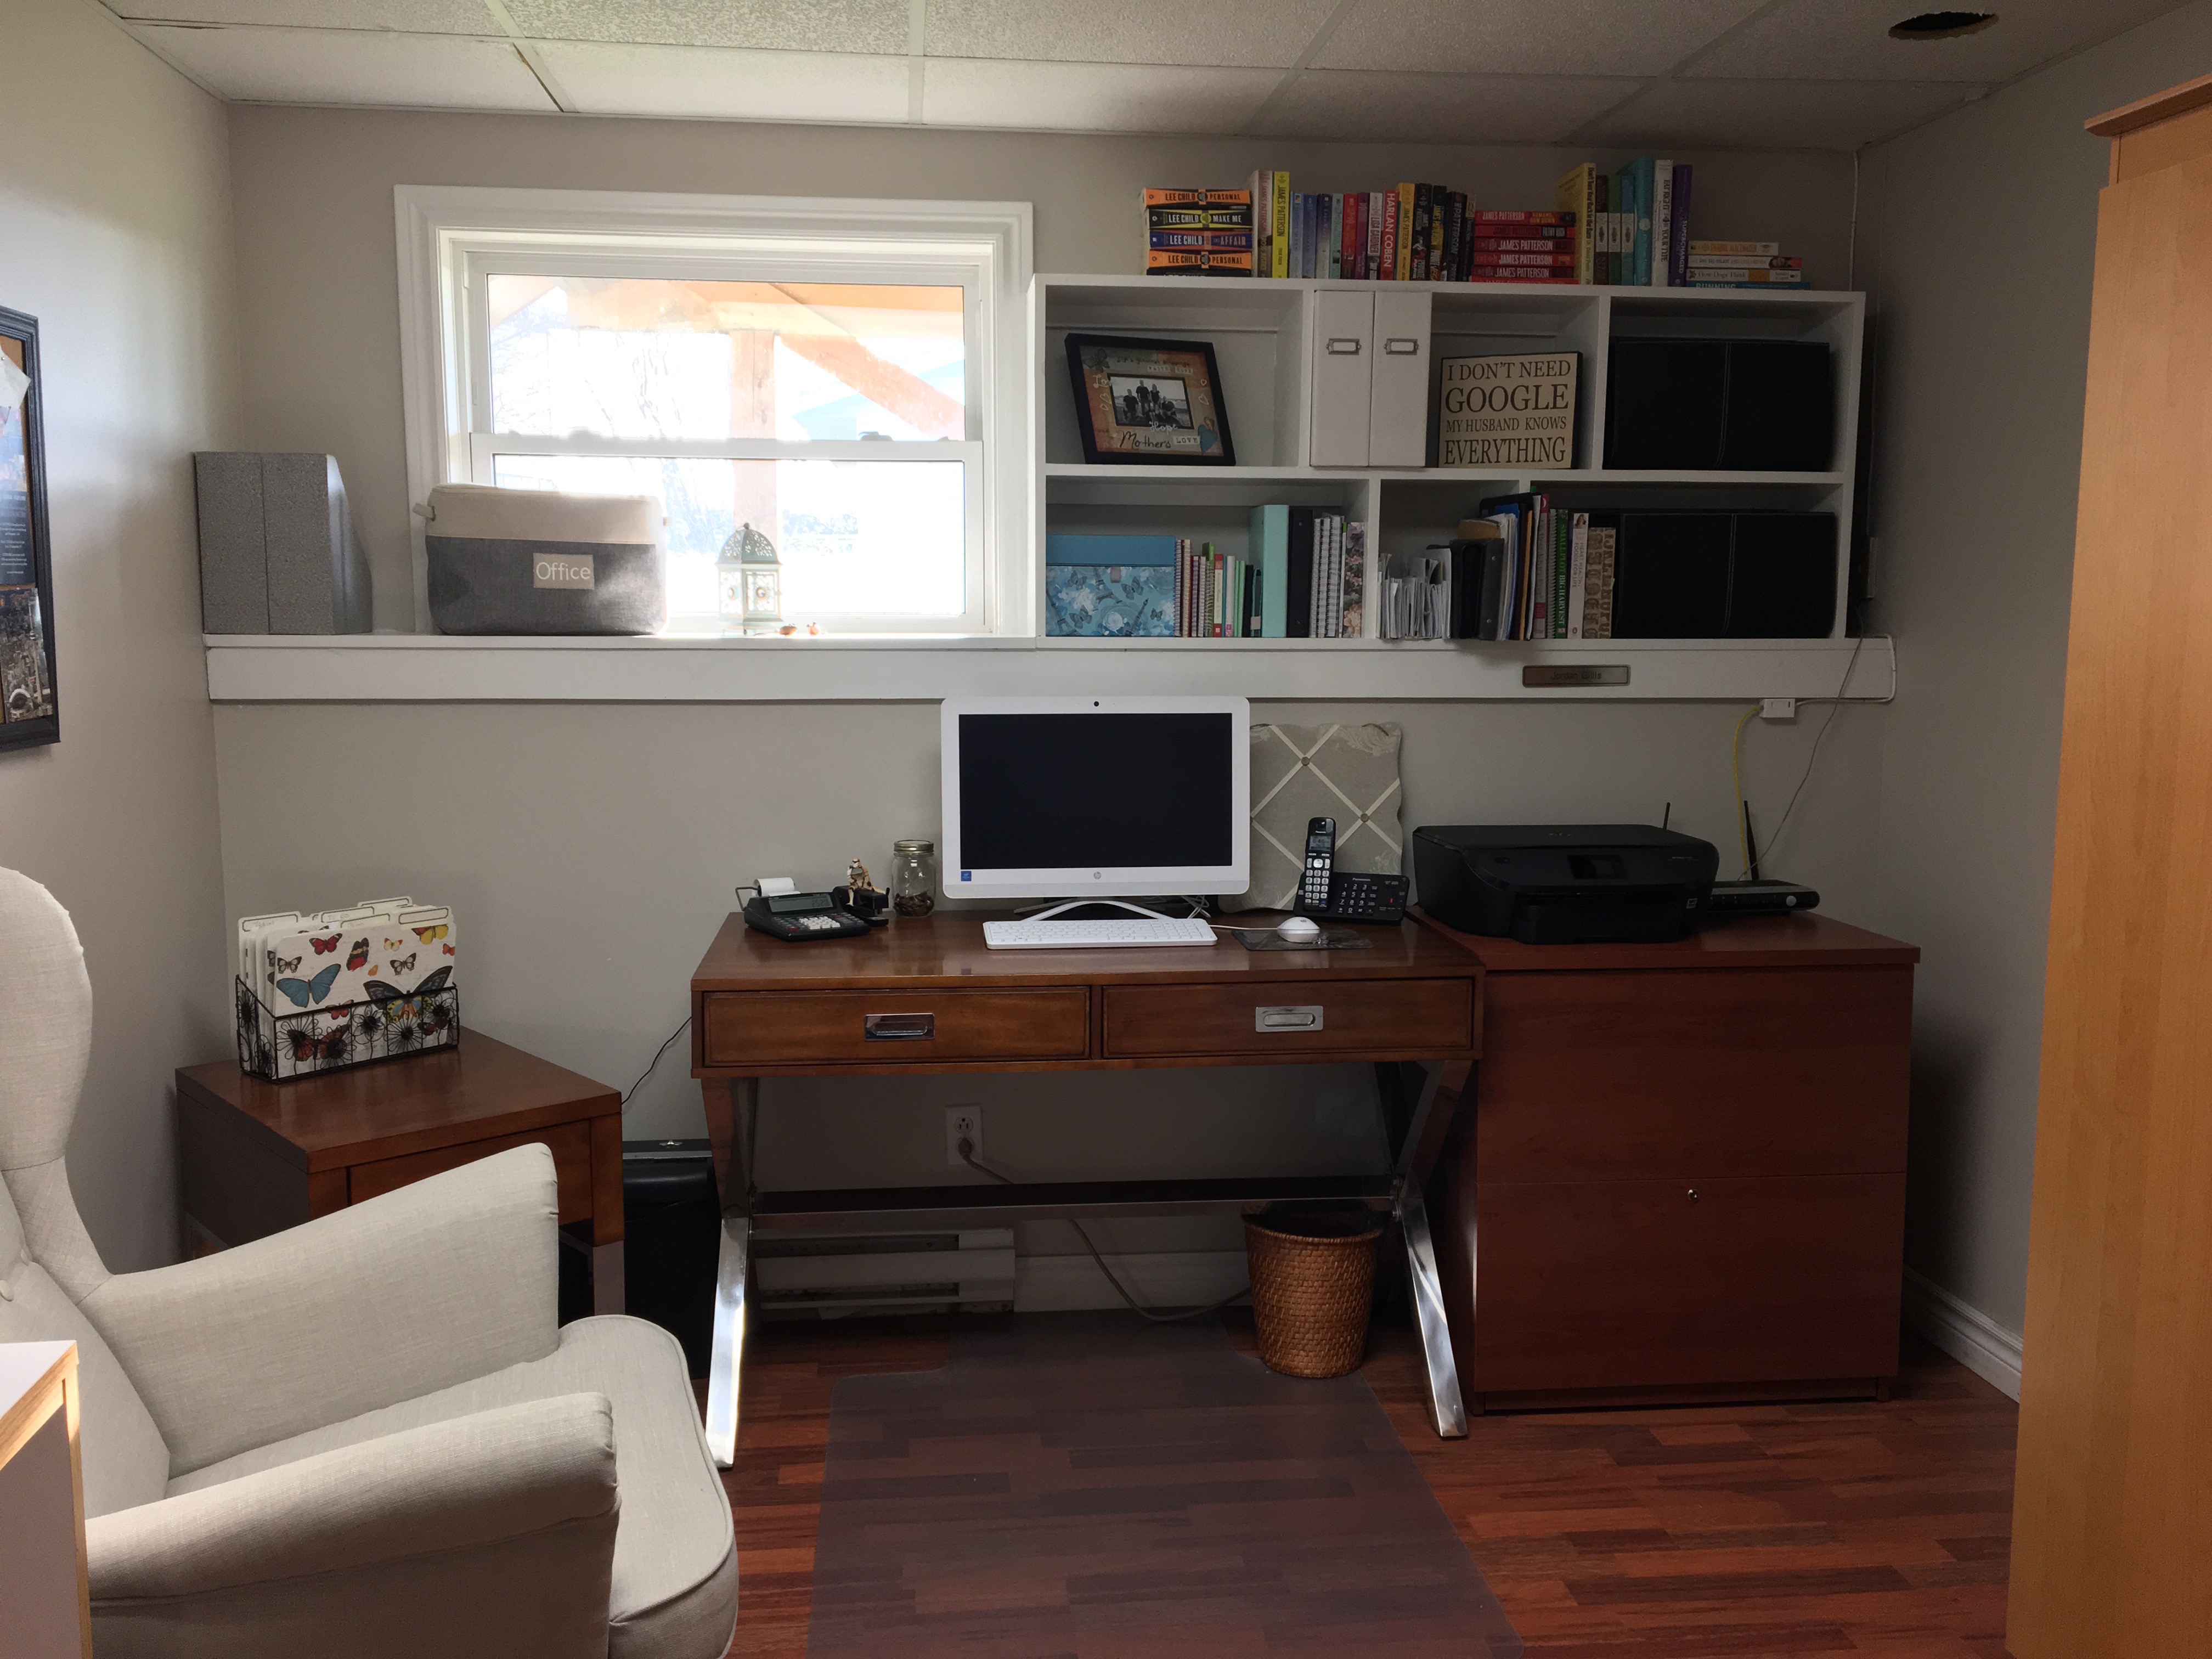 Before & After: An Organized Client Office Project